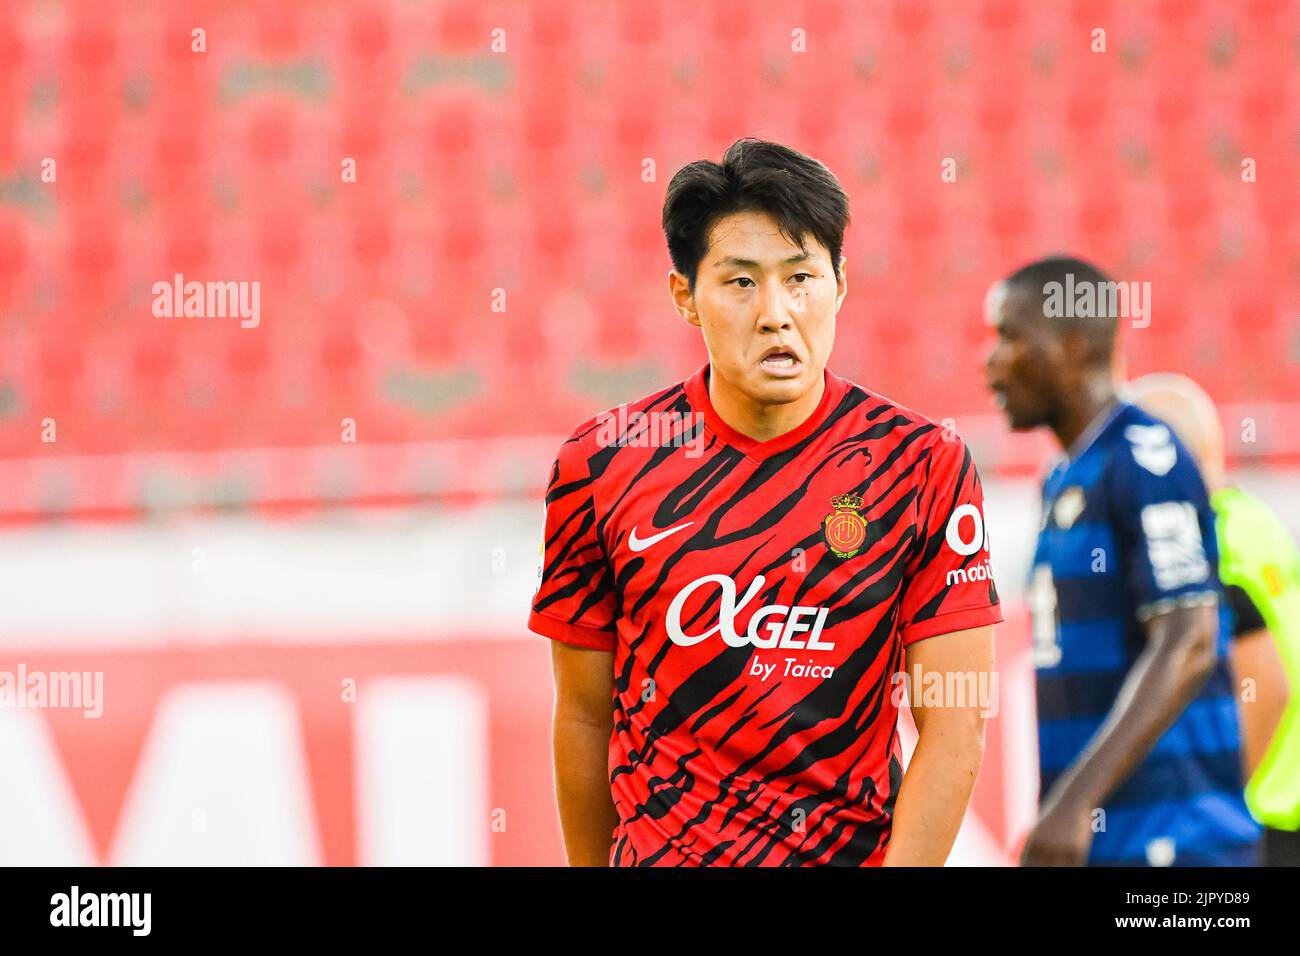 MALLORCA, SPAIN - AUGUST 20: Kang-in Lee of RCD Mallorca during in the match between RCD Mallorca and Real Betis of La Liga Santander on August 20, 2022 at Visit Mallorca Stadium Son Moix in Mallorca, Spain. (Photo by Samuel Carreño/PxImages) Stock Photo